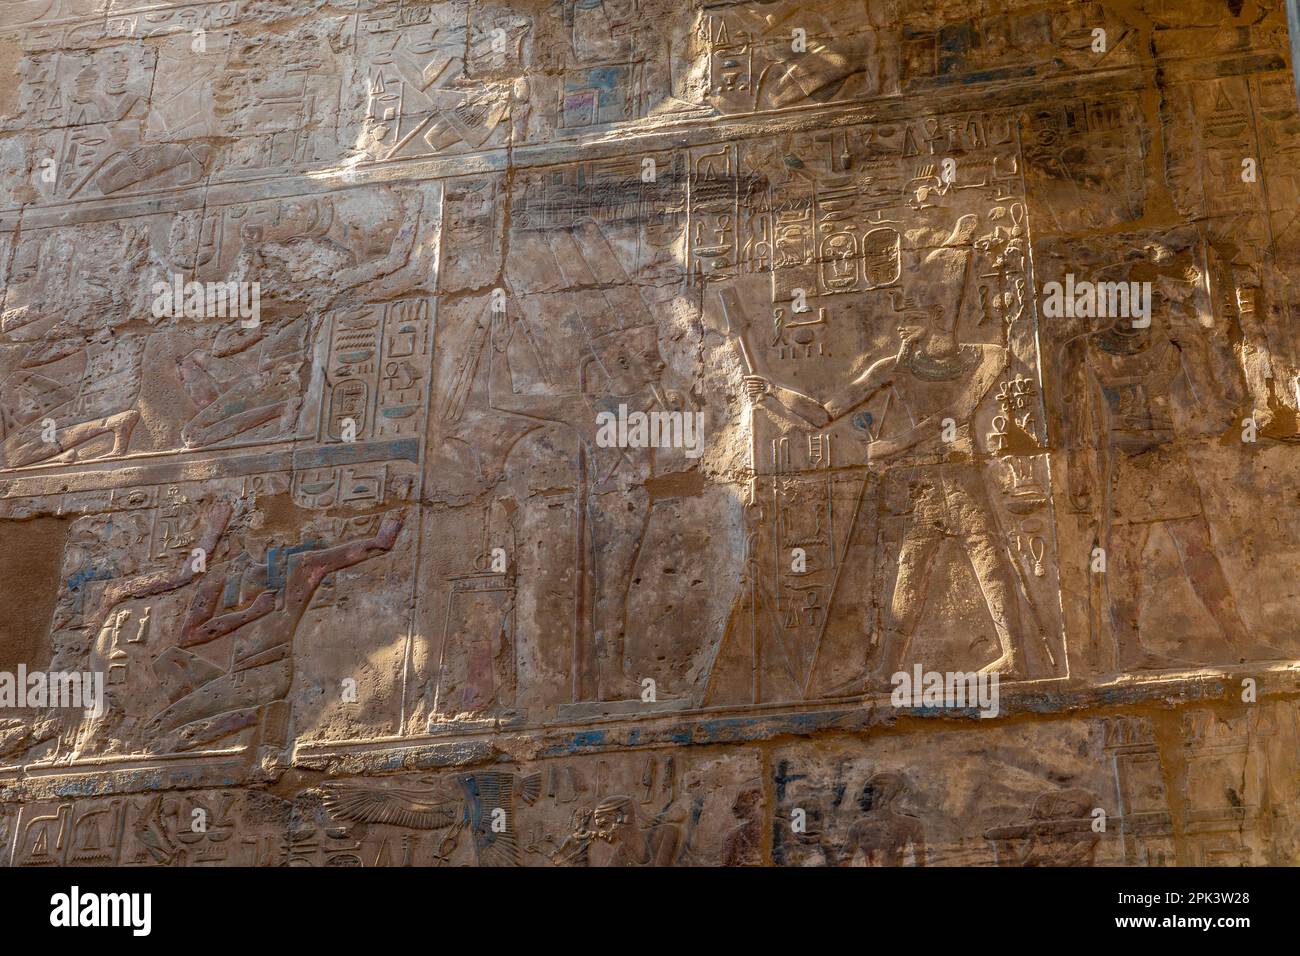 Stone Carvings and Hieroglyphs at Luxor Temple, Luxor, Egypt, North East Africa Stock Photo